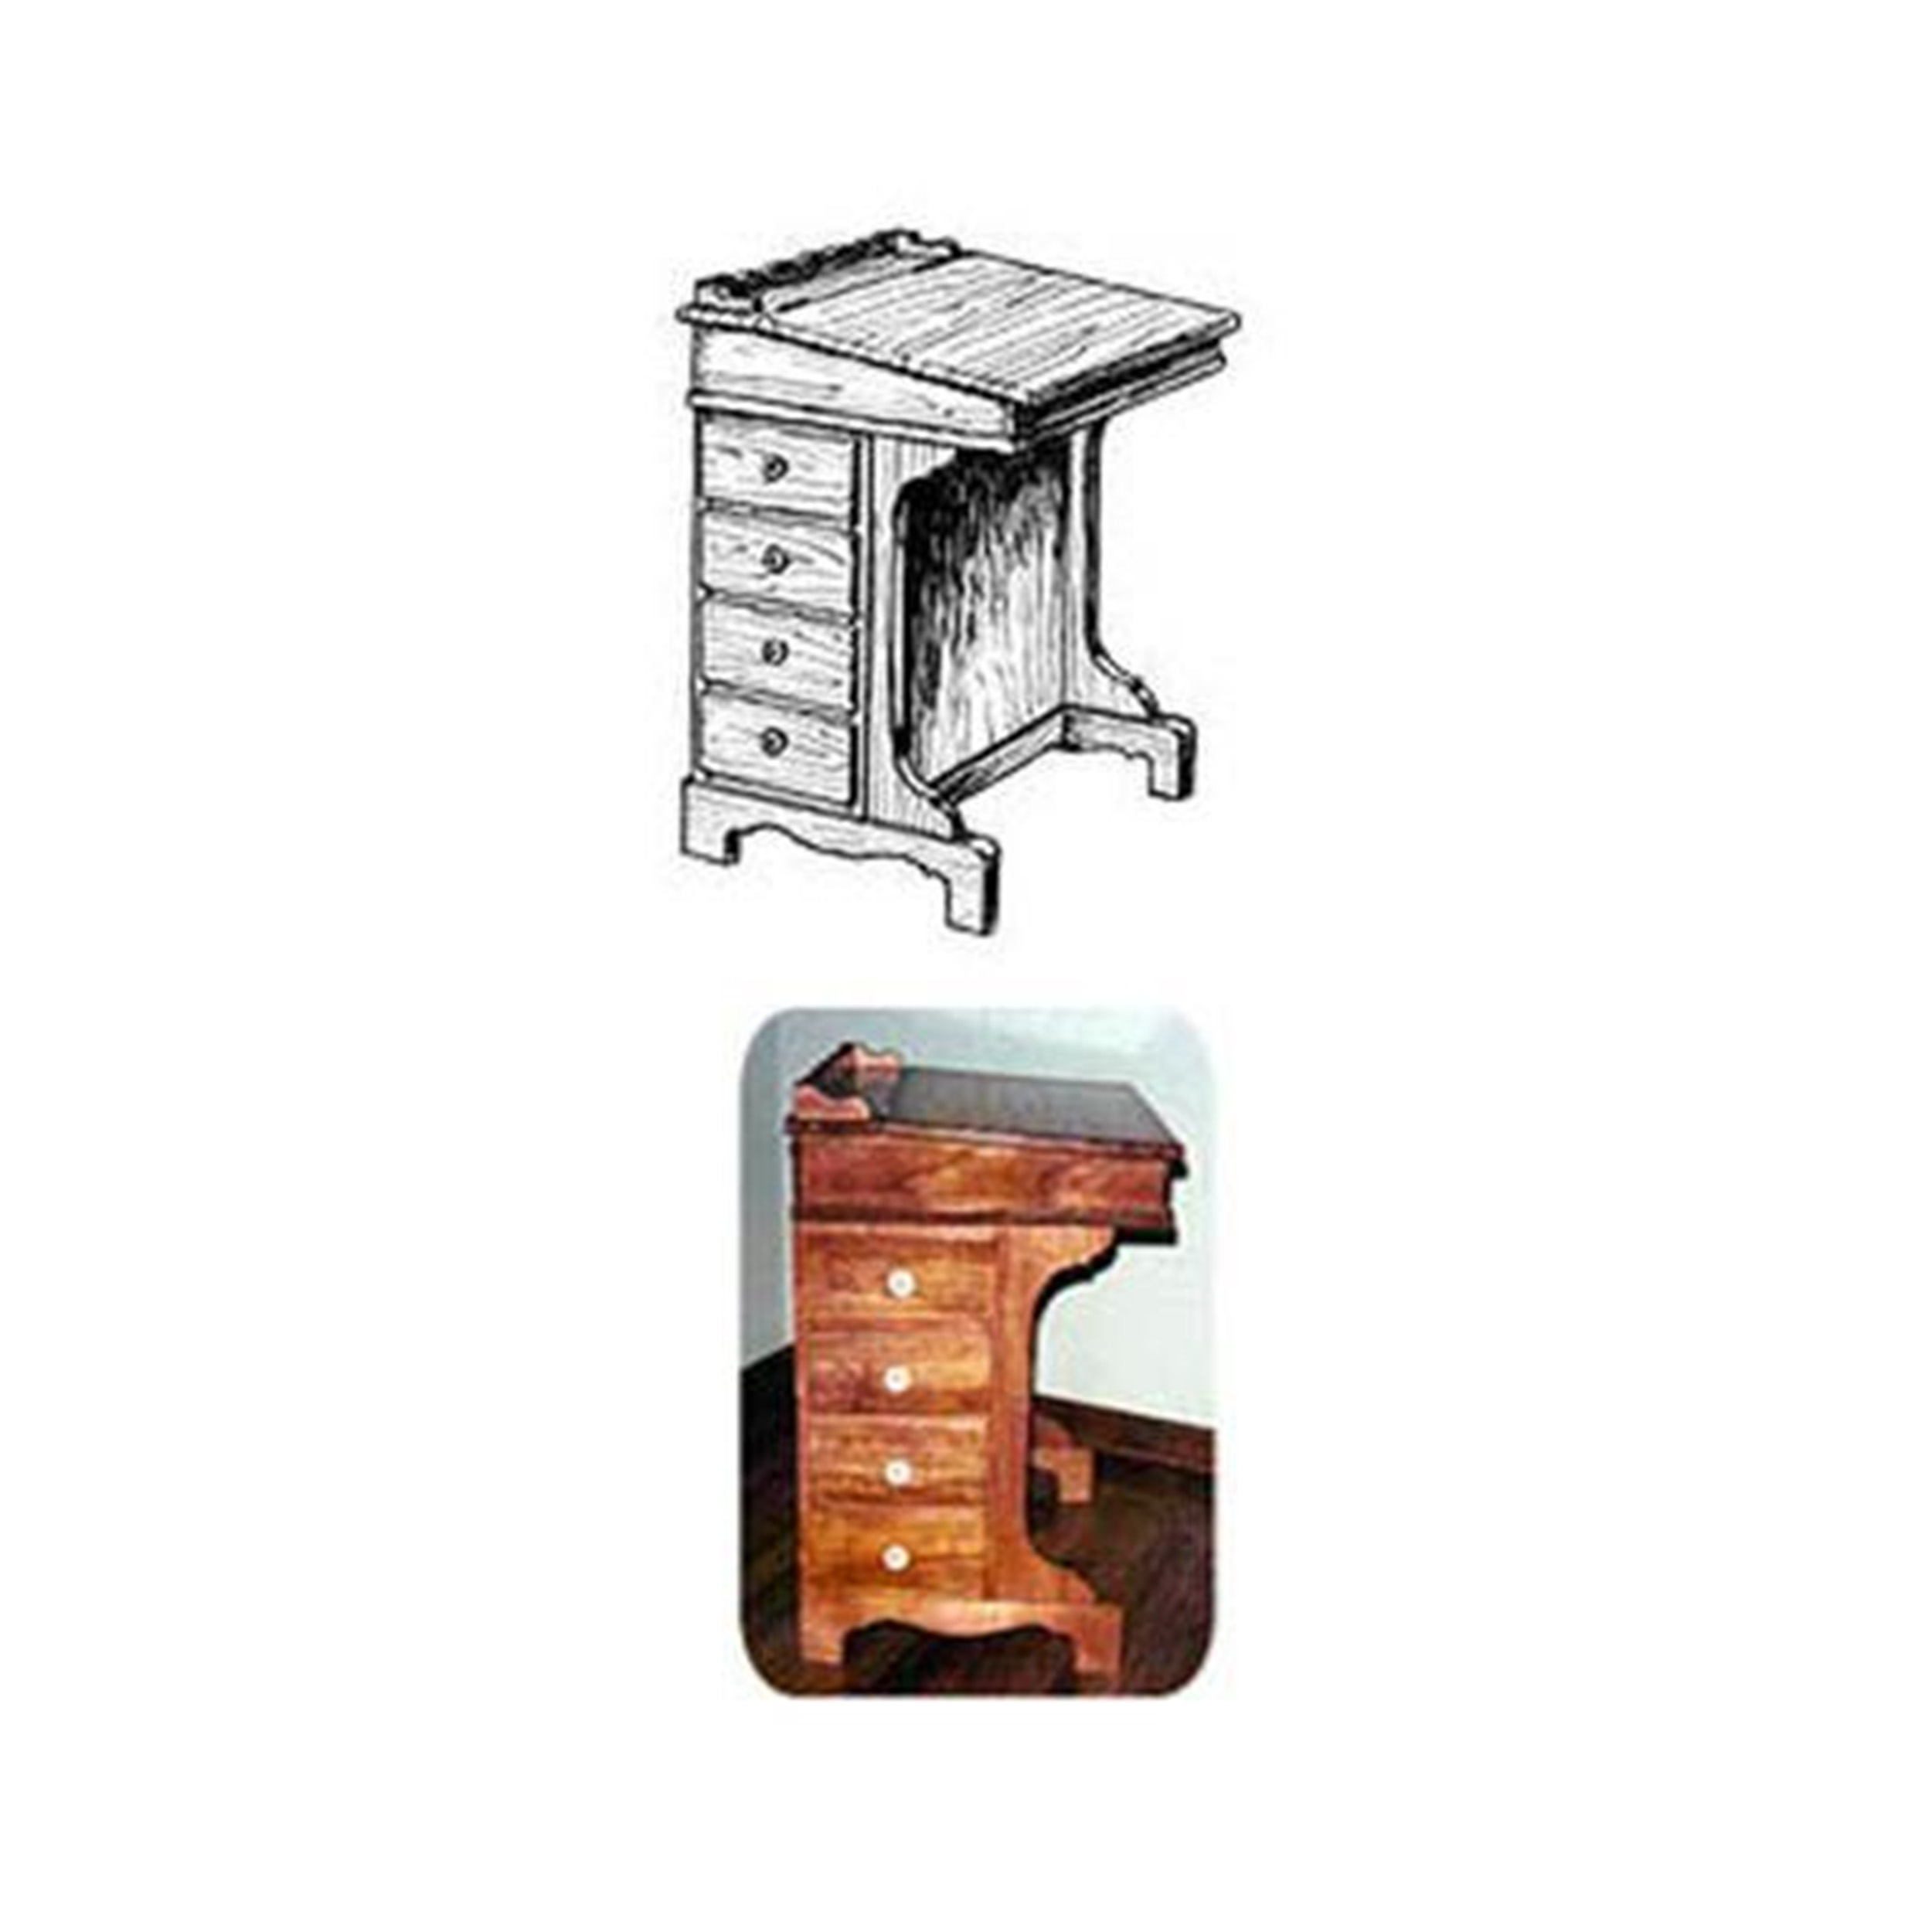 Woodworking Project Paper Plan To Build Captain's Writing Desk